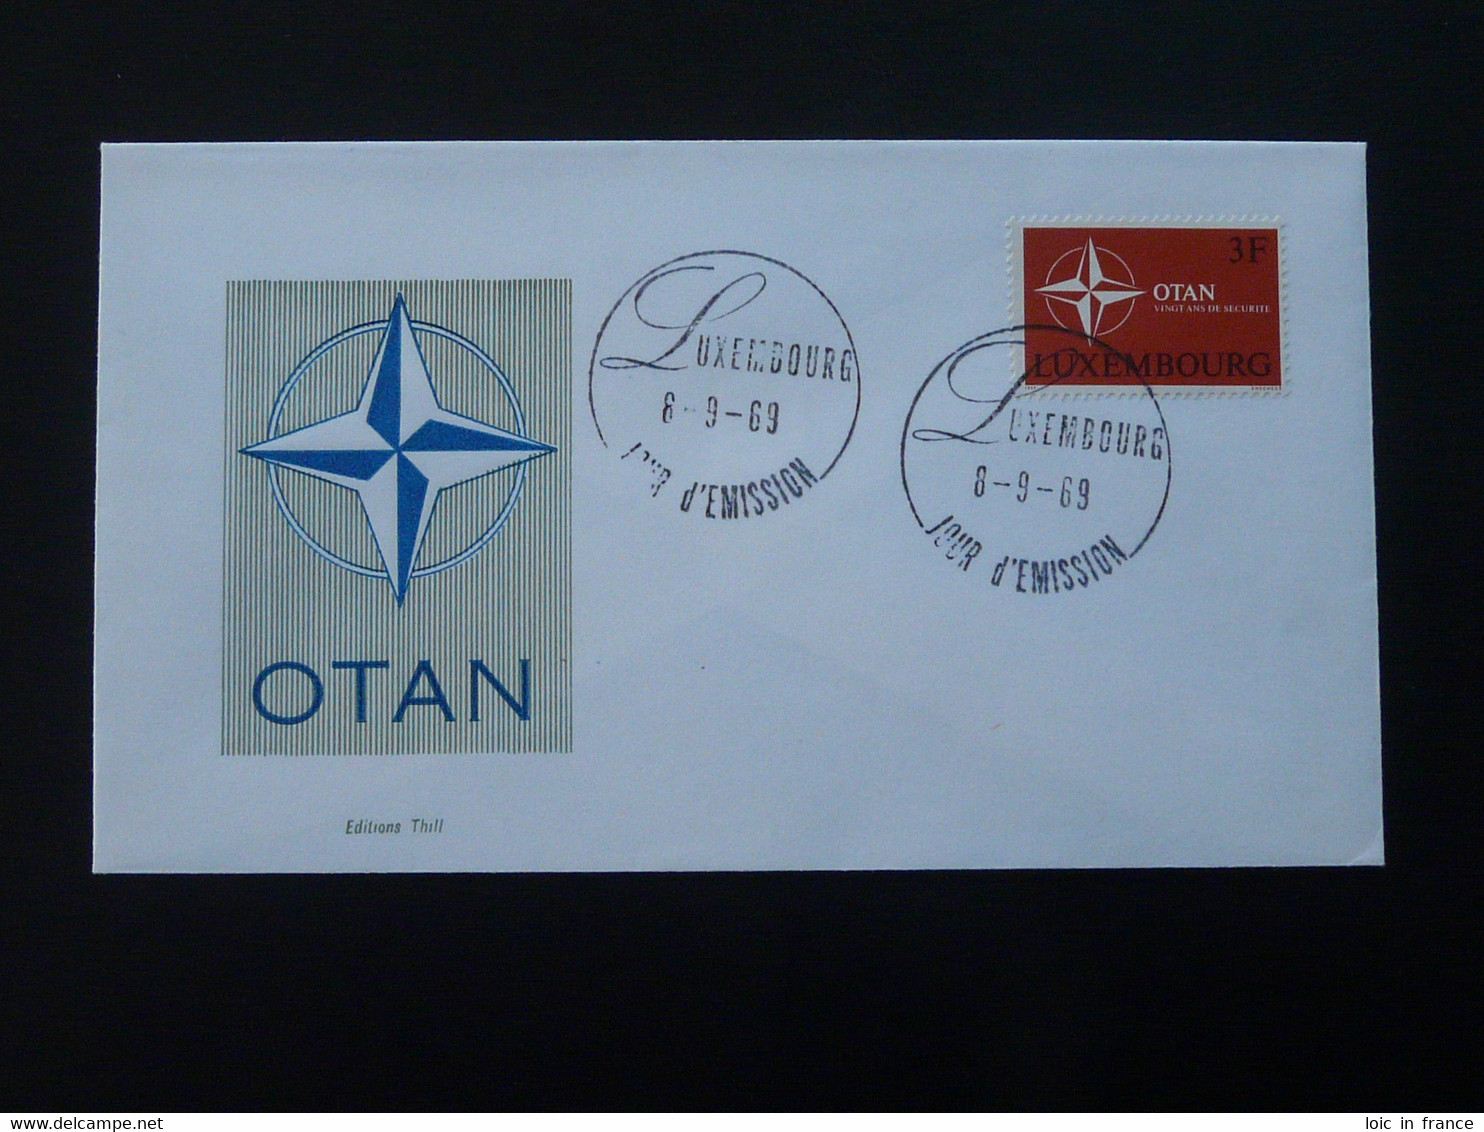 FDC OTAN NATO Luxembourg 1969 - Covers & Documents